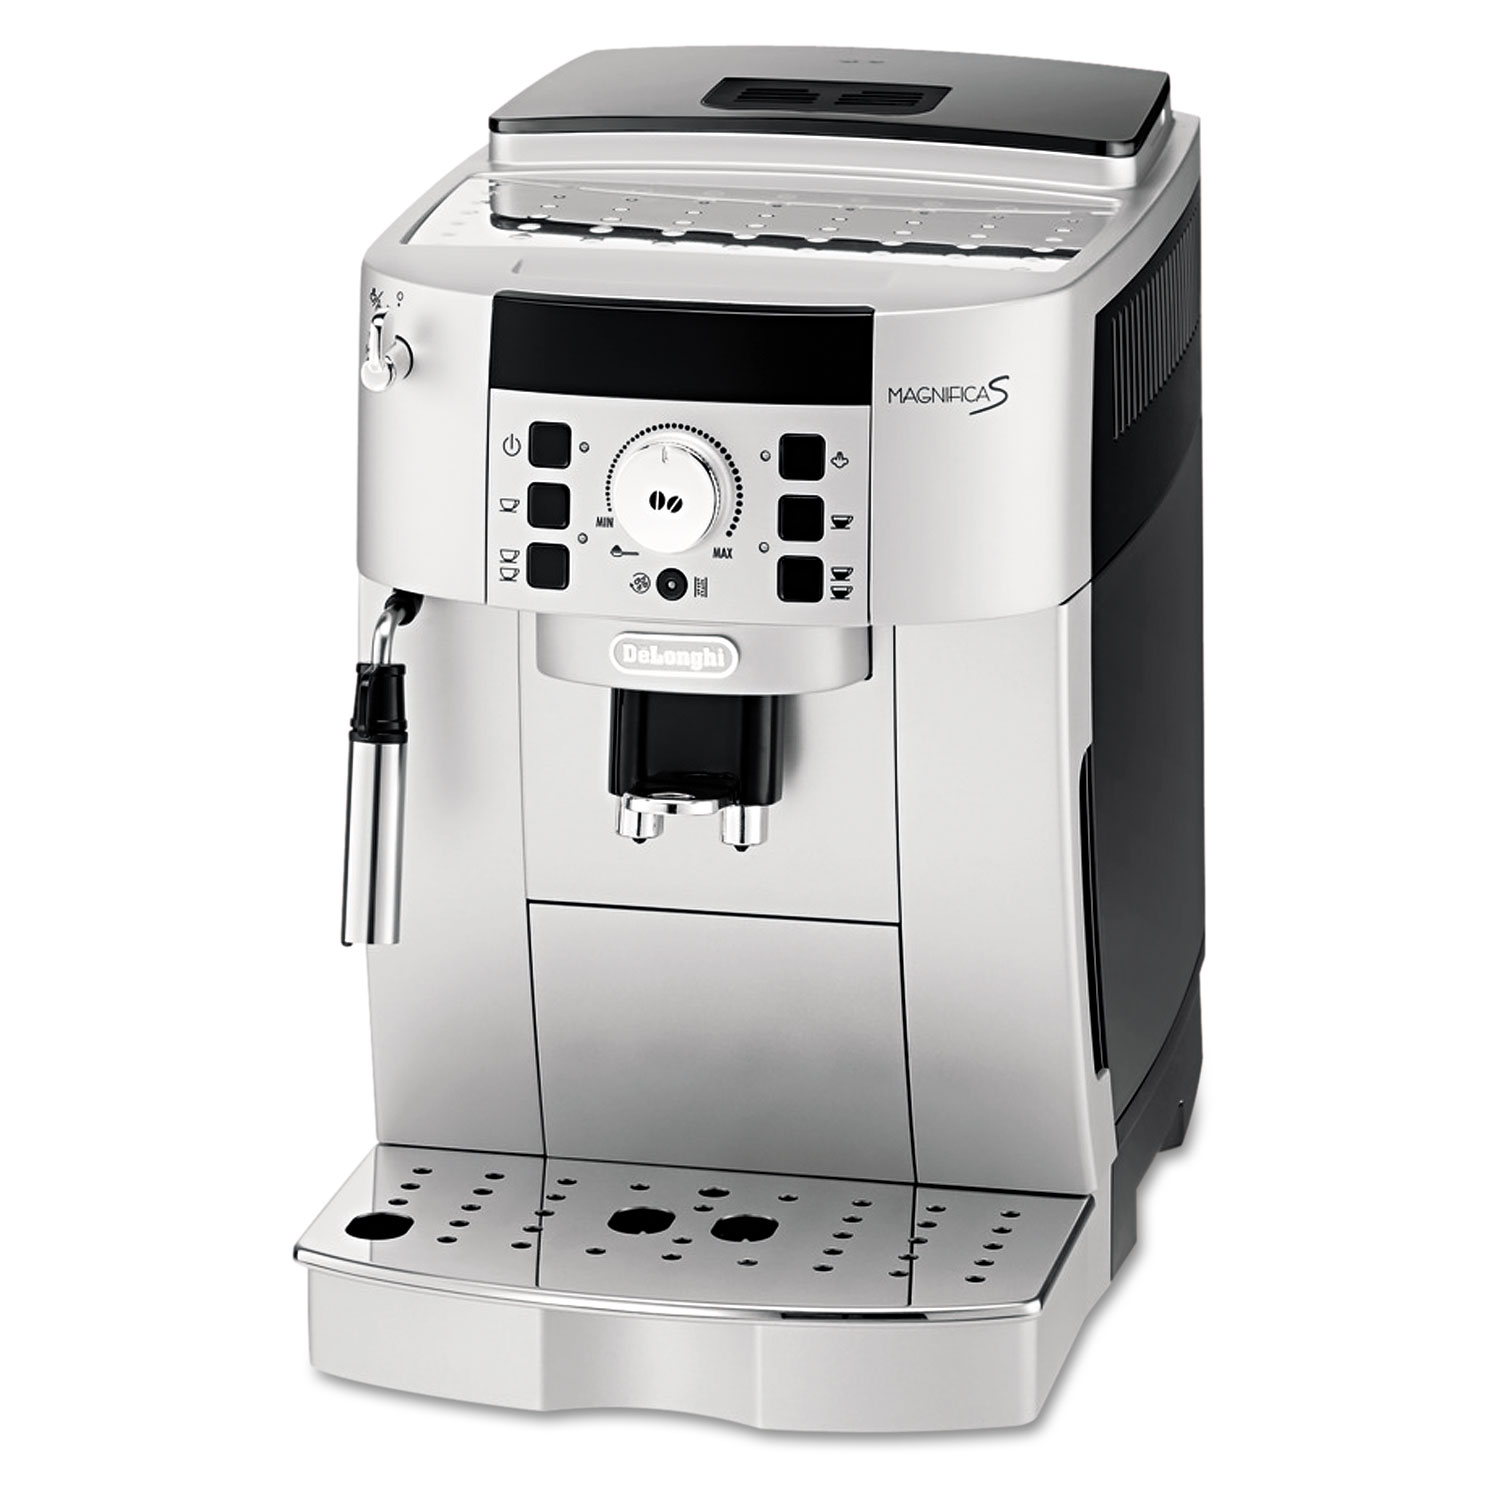 Super Automatic Espresso and Cappuccino Maker, Stainless Steel